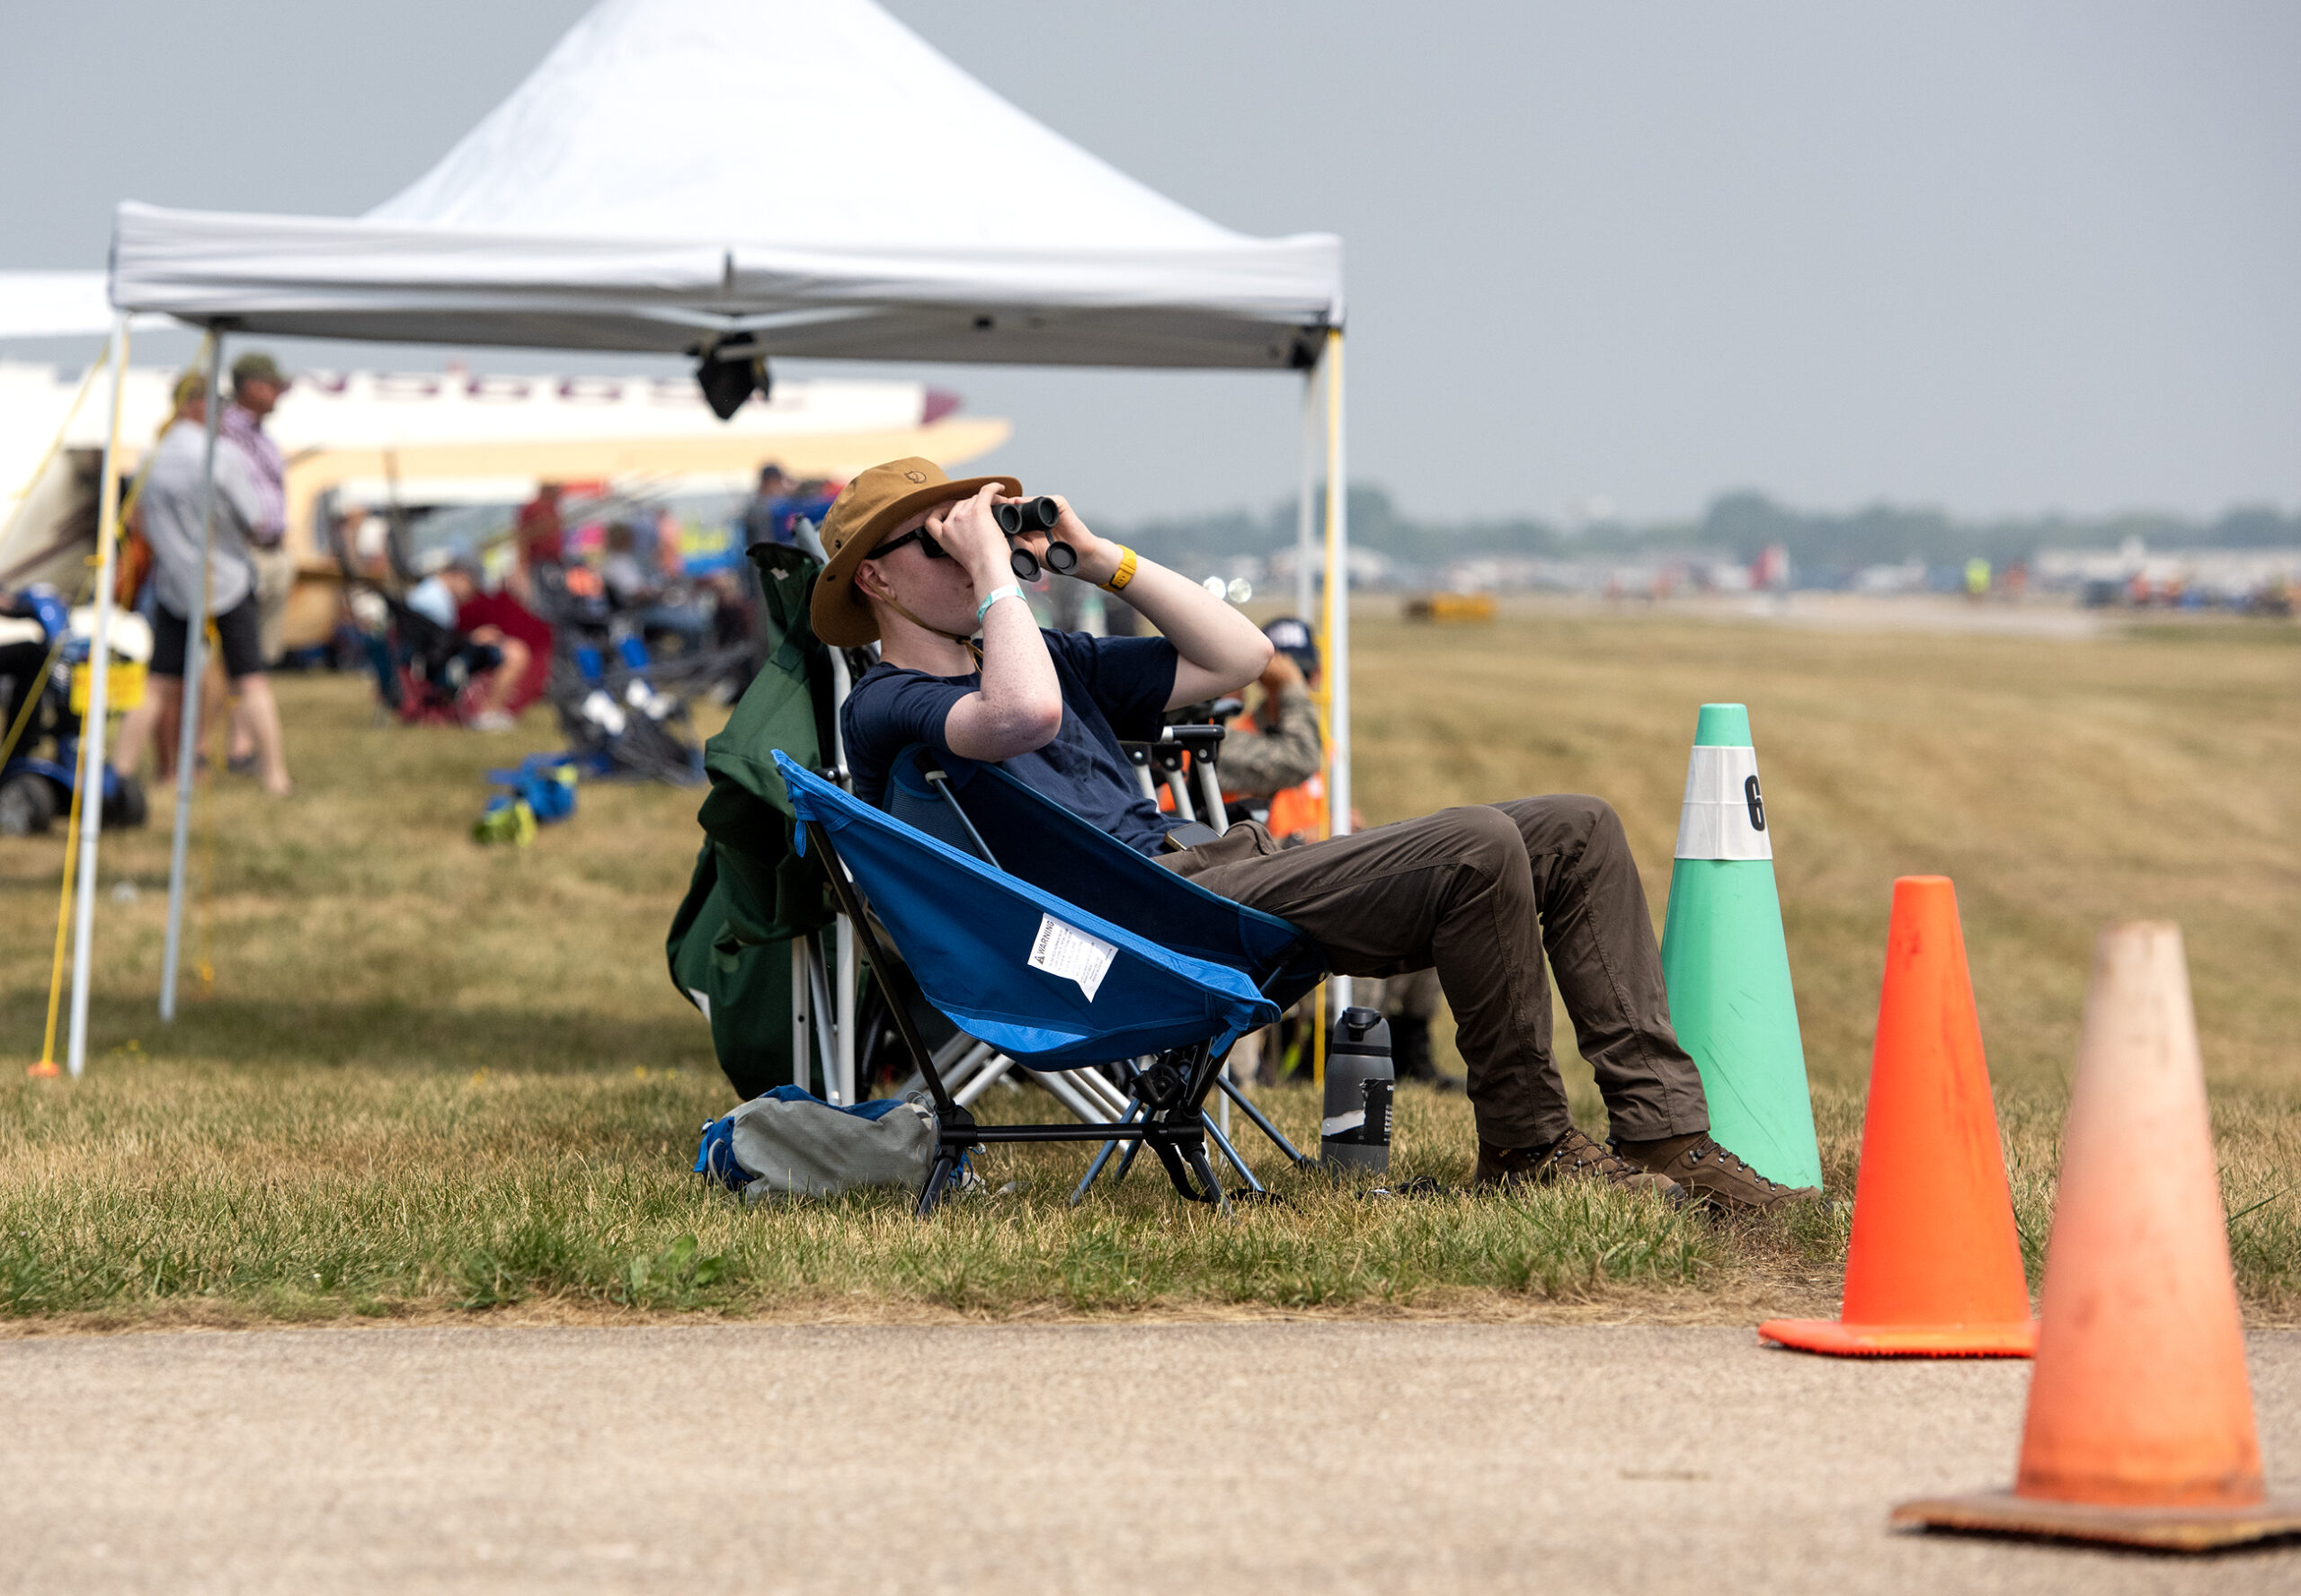 A man sits in a lawn chair and looks up using binoculars.